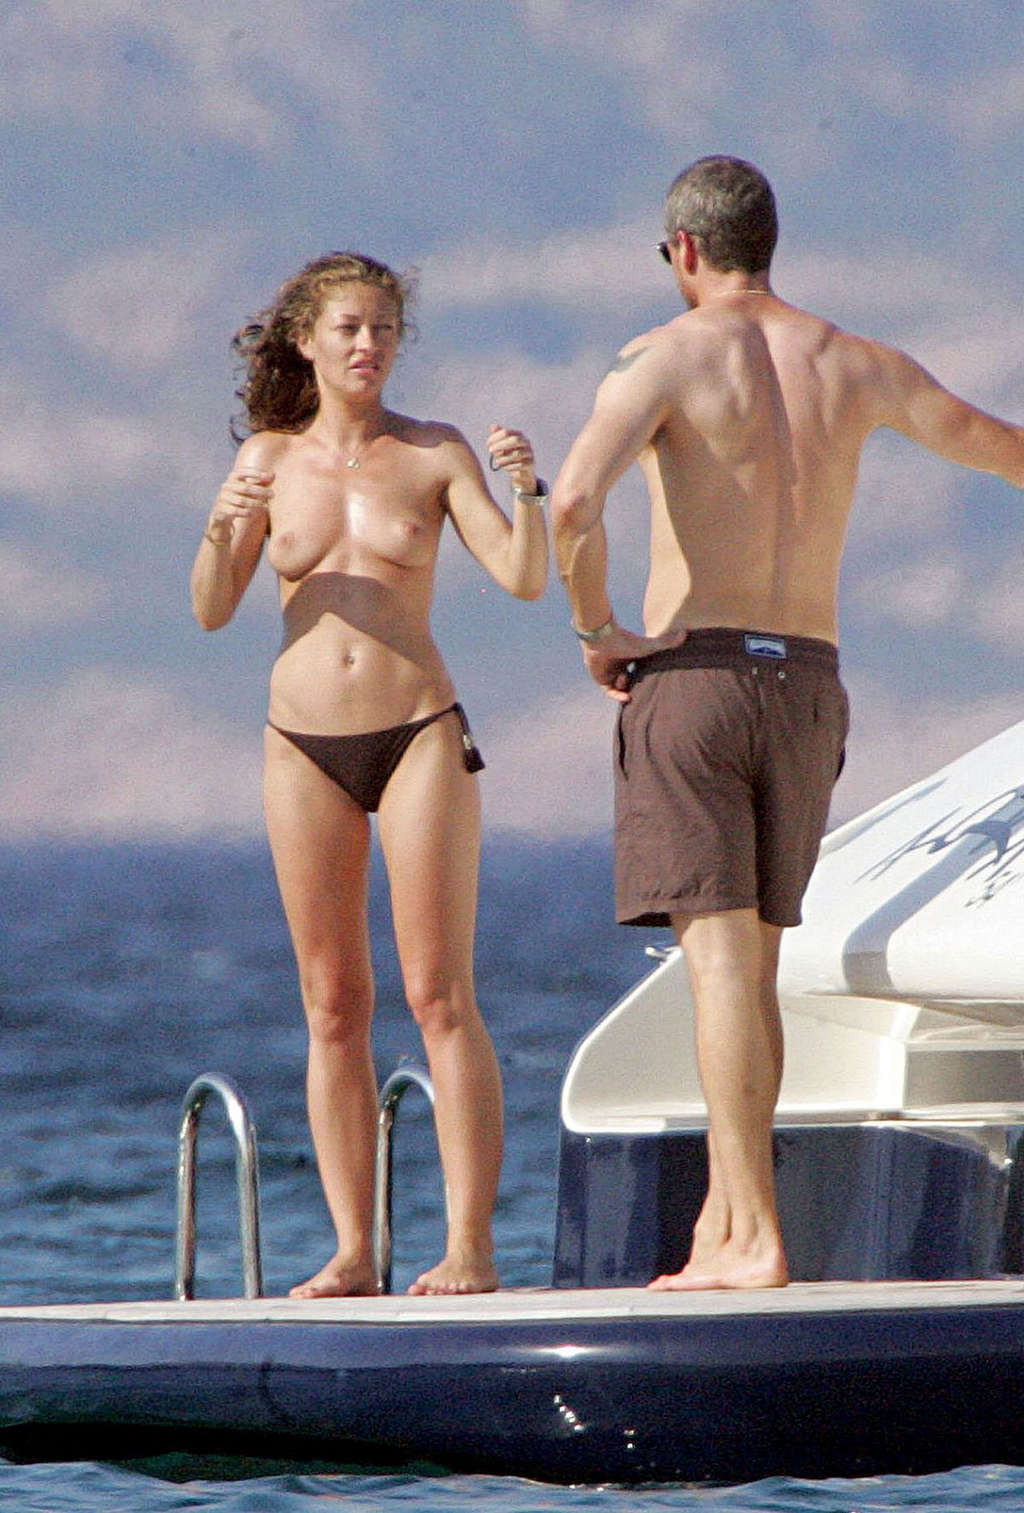 Rebecca Gayheart showing her nice tits on yacht paparazzi pictures #75359212